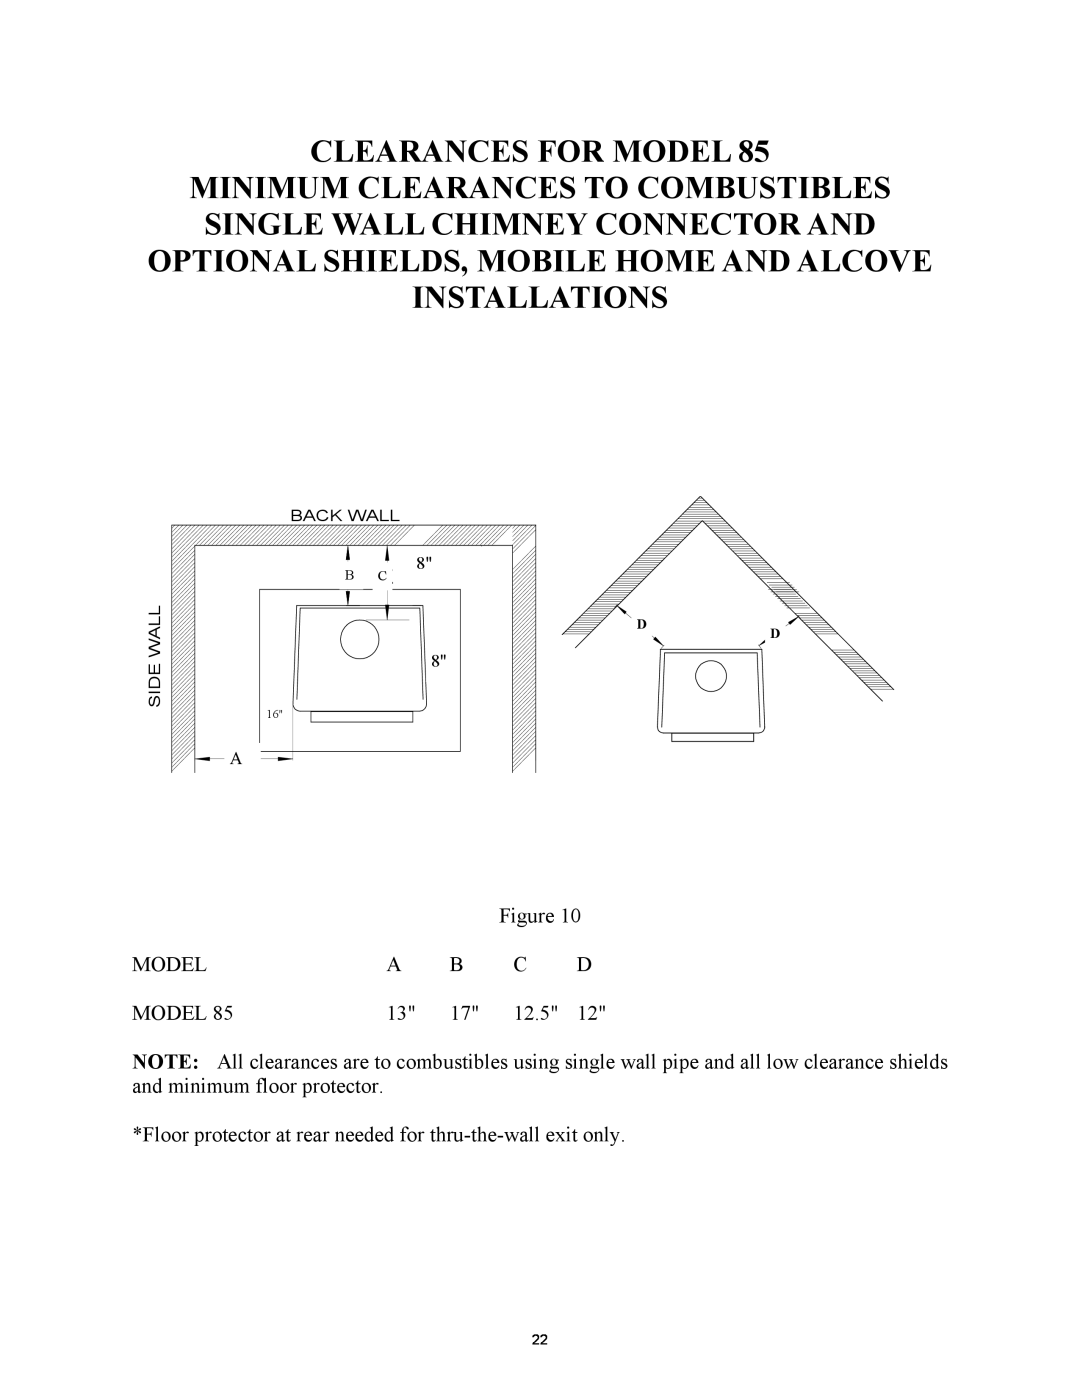 New Buck Corporation 85 installation instructions Clearances For Model 